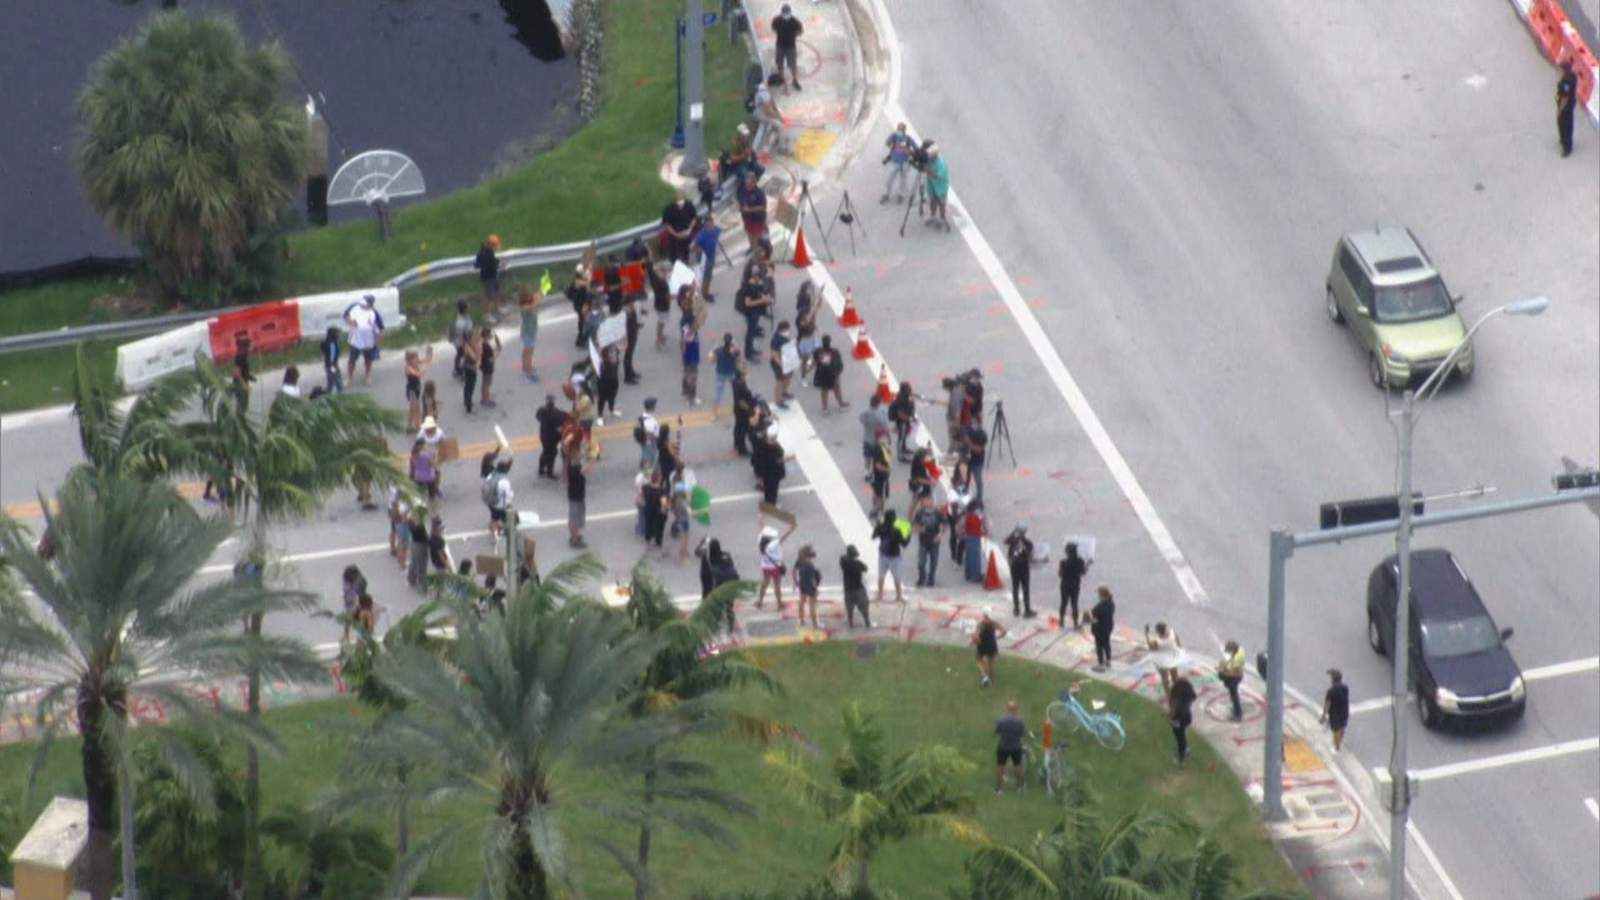 Protests continue in South Florida on Saturday, with several planned across Miami-Dade and Broward